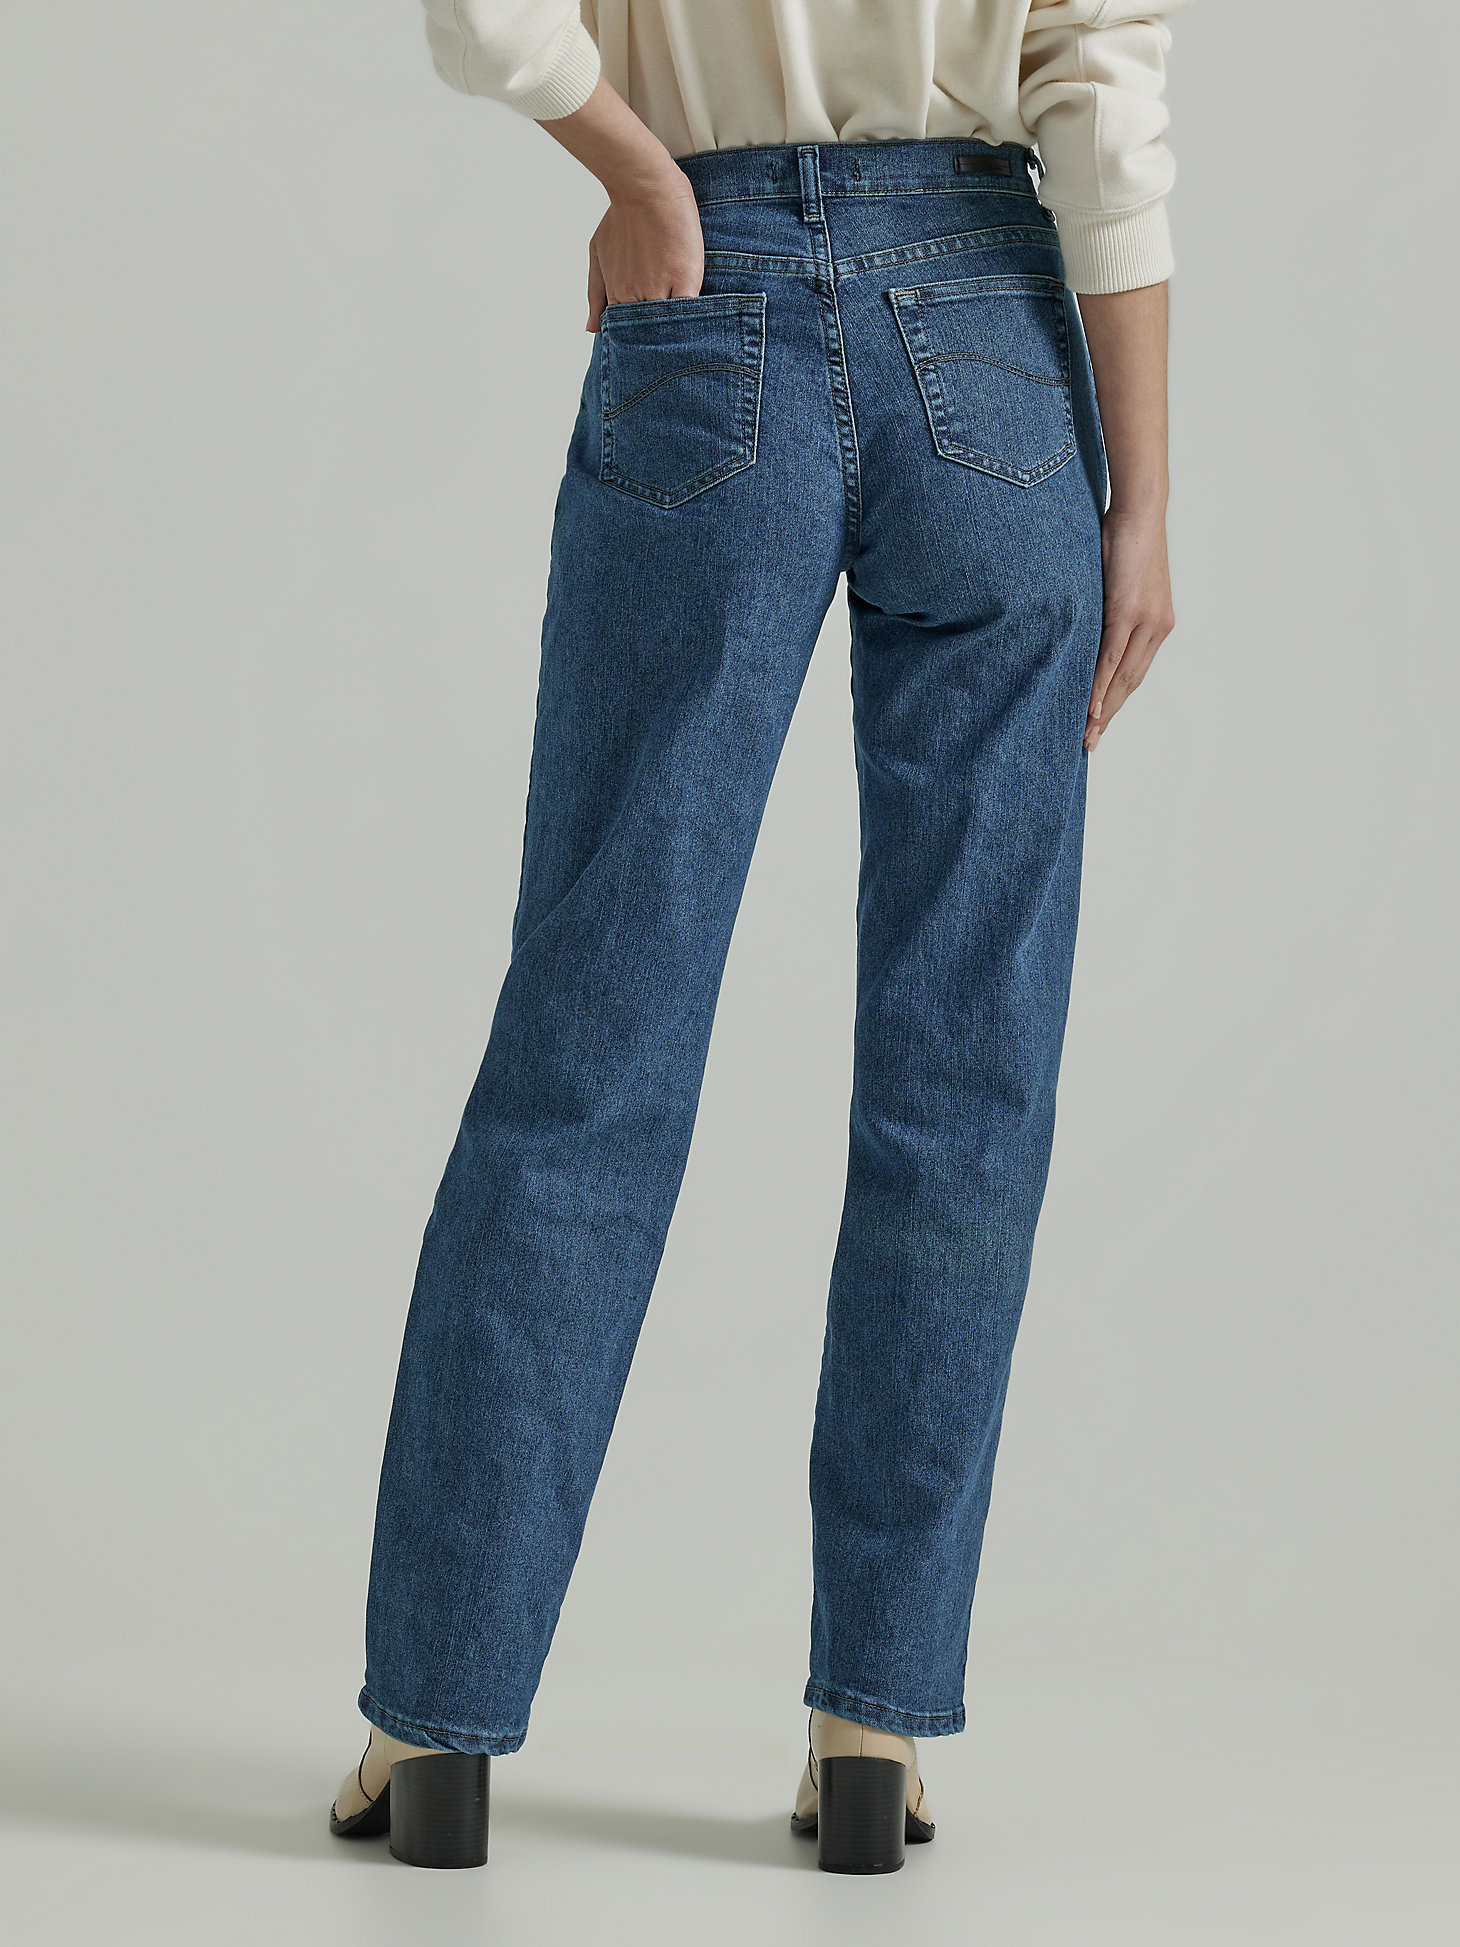 Women’s Original Relaxed Fit Straight Leg Jeans in Premium Stone alternative view 1